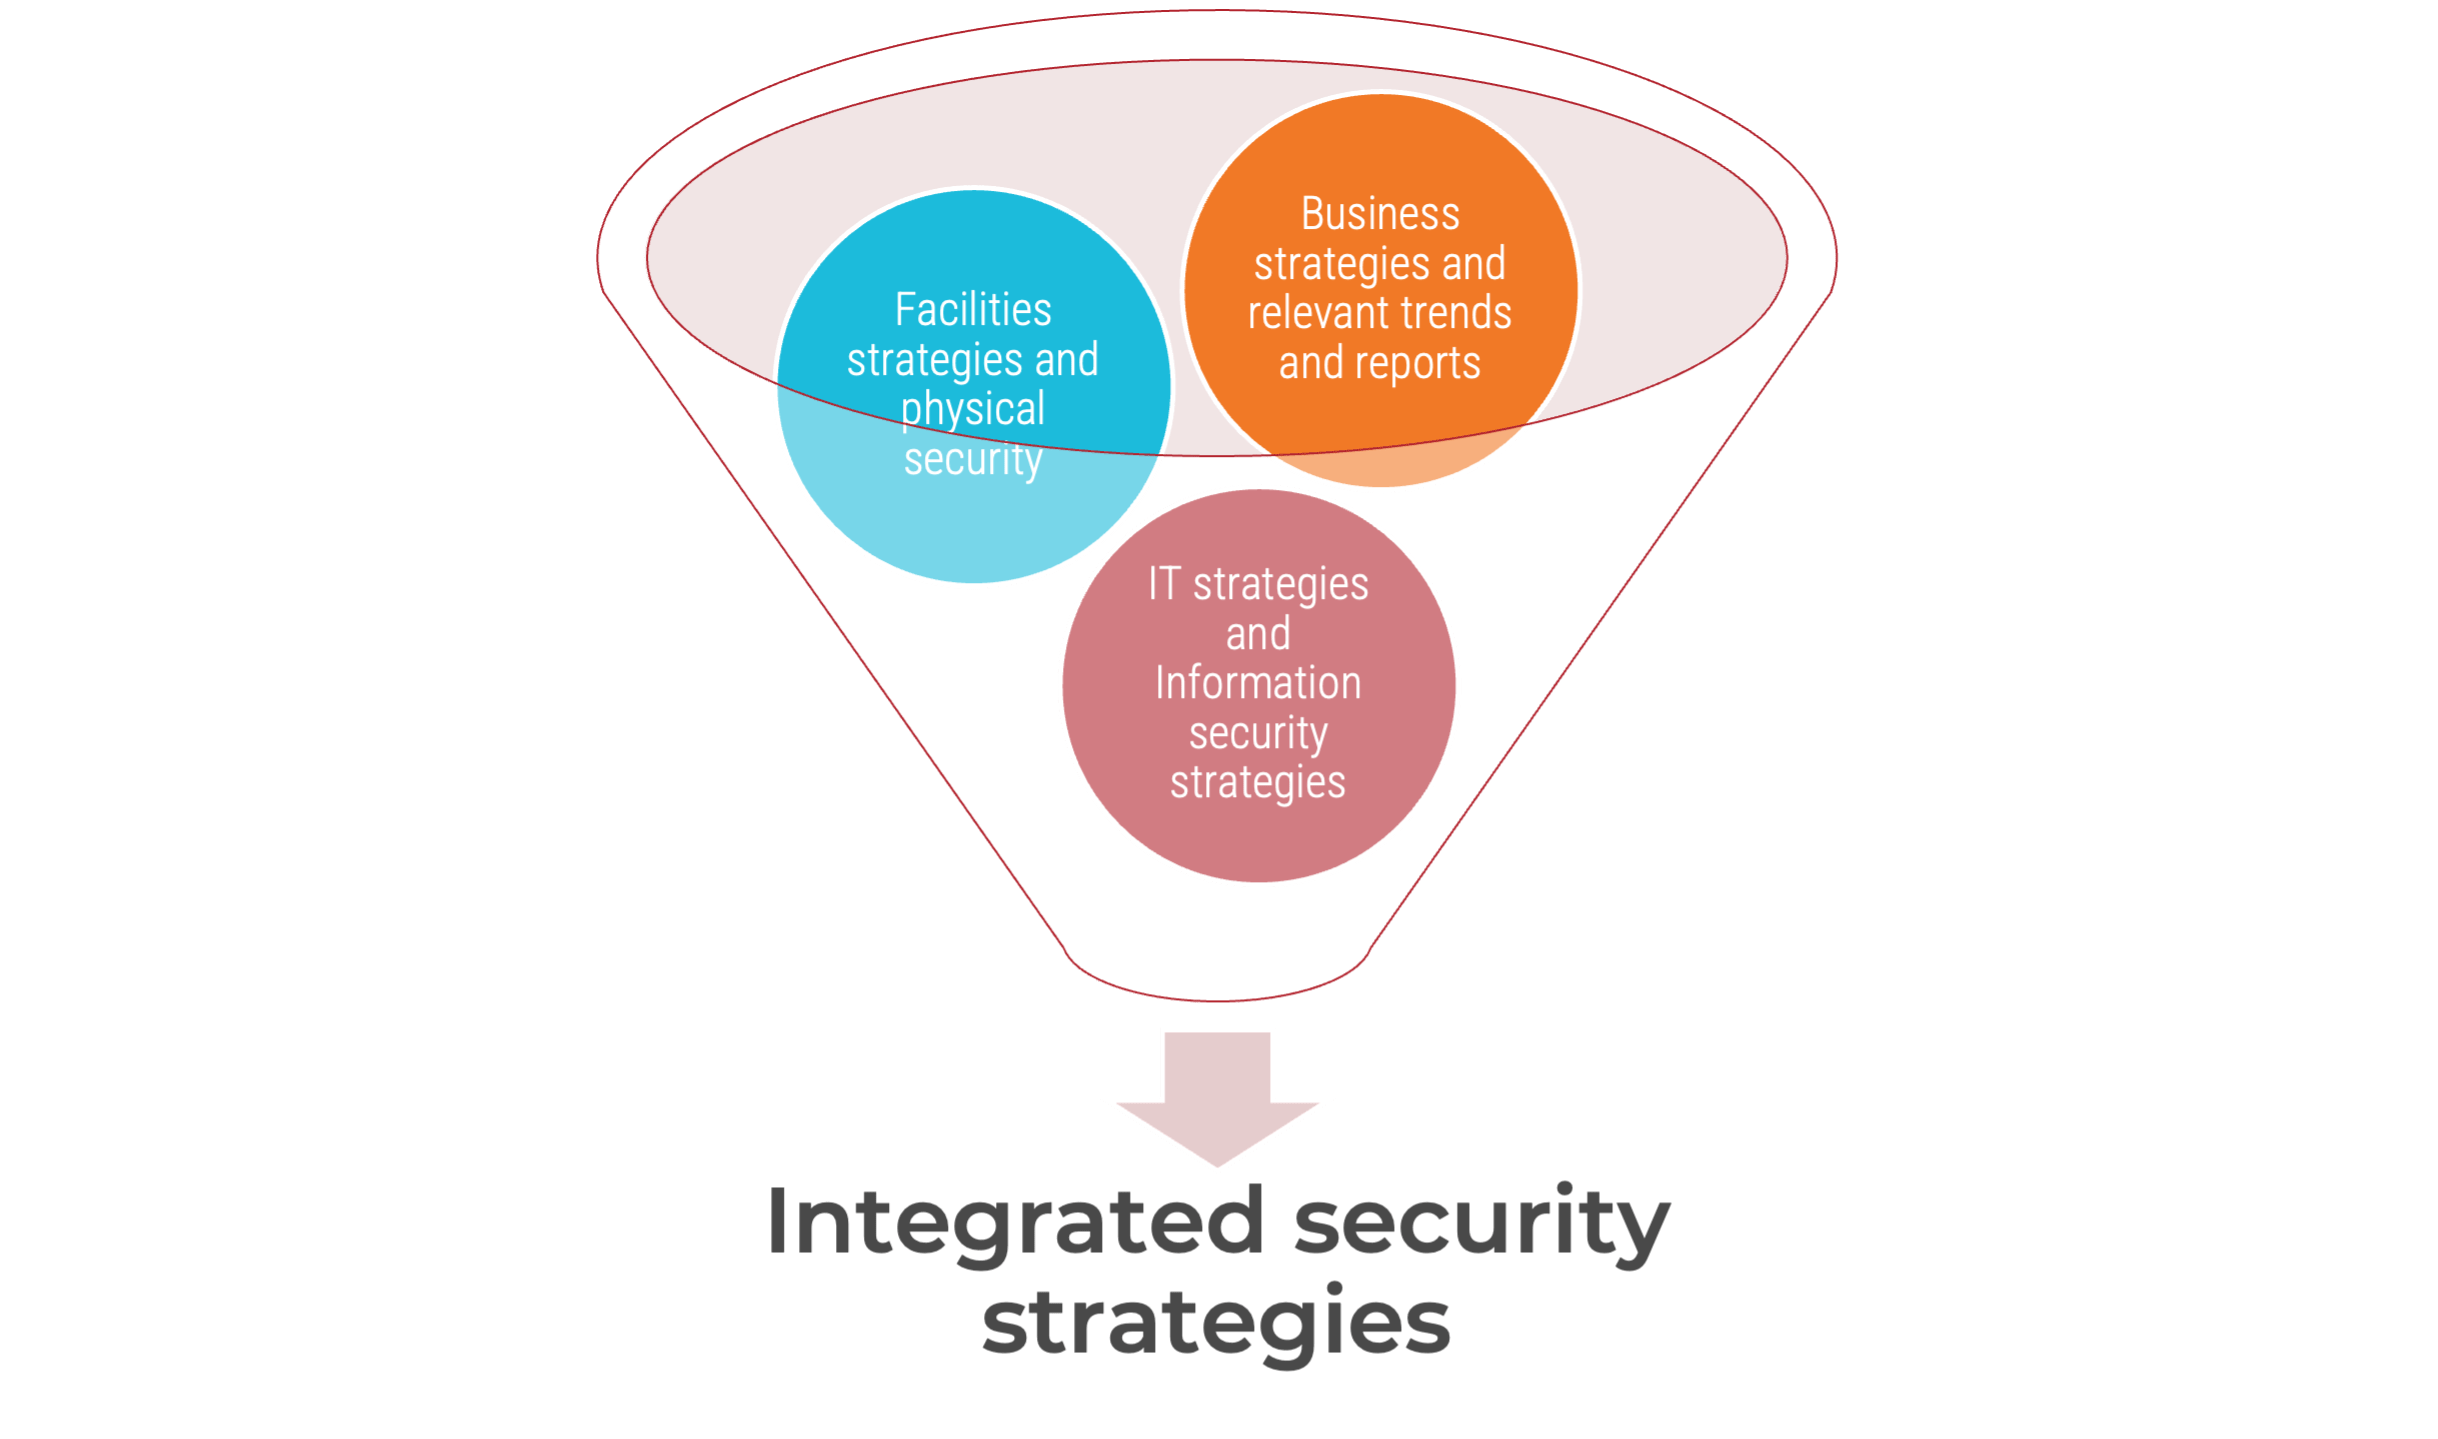 Integrated security strategies. Consists of an organization’s business strategies, IT strategies, facilities strategies, and physical and information security strategies.